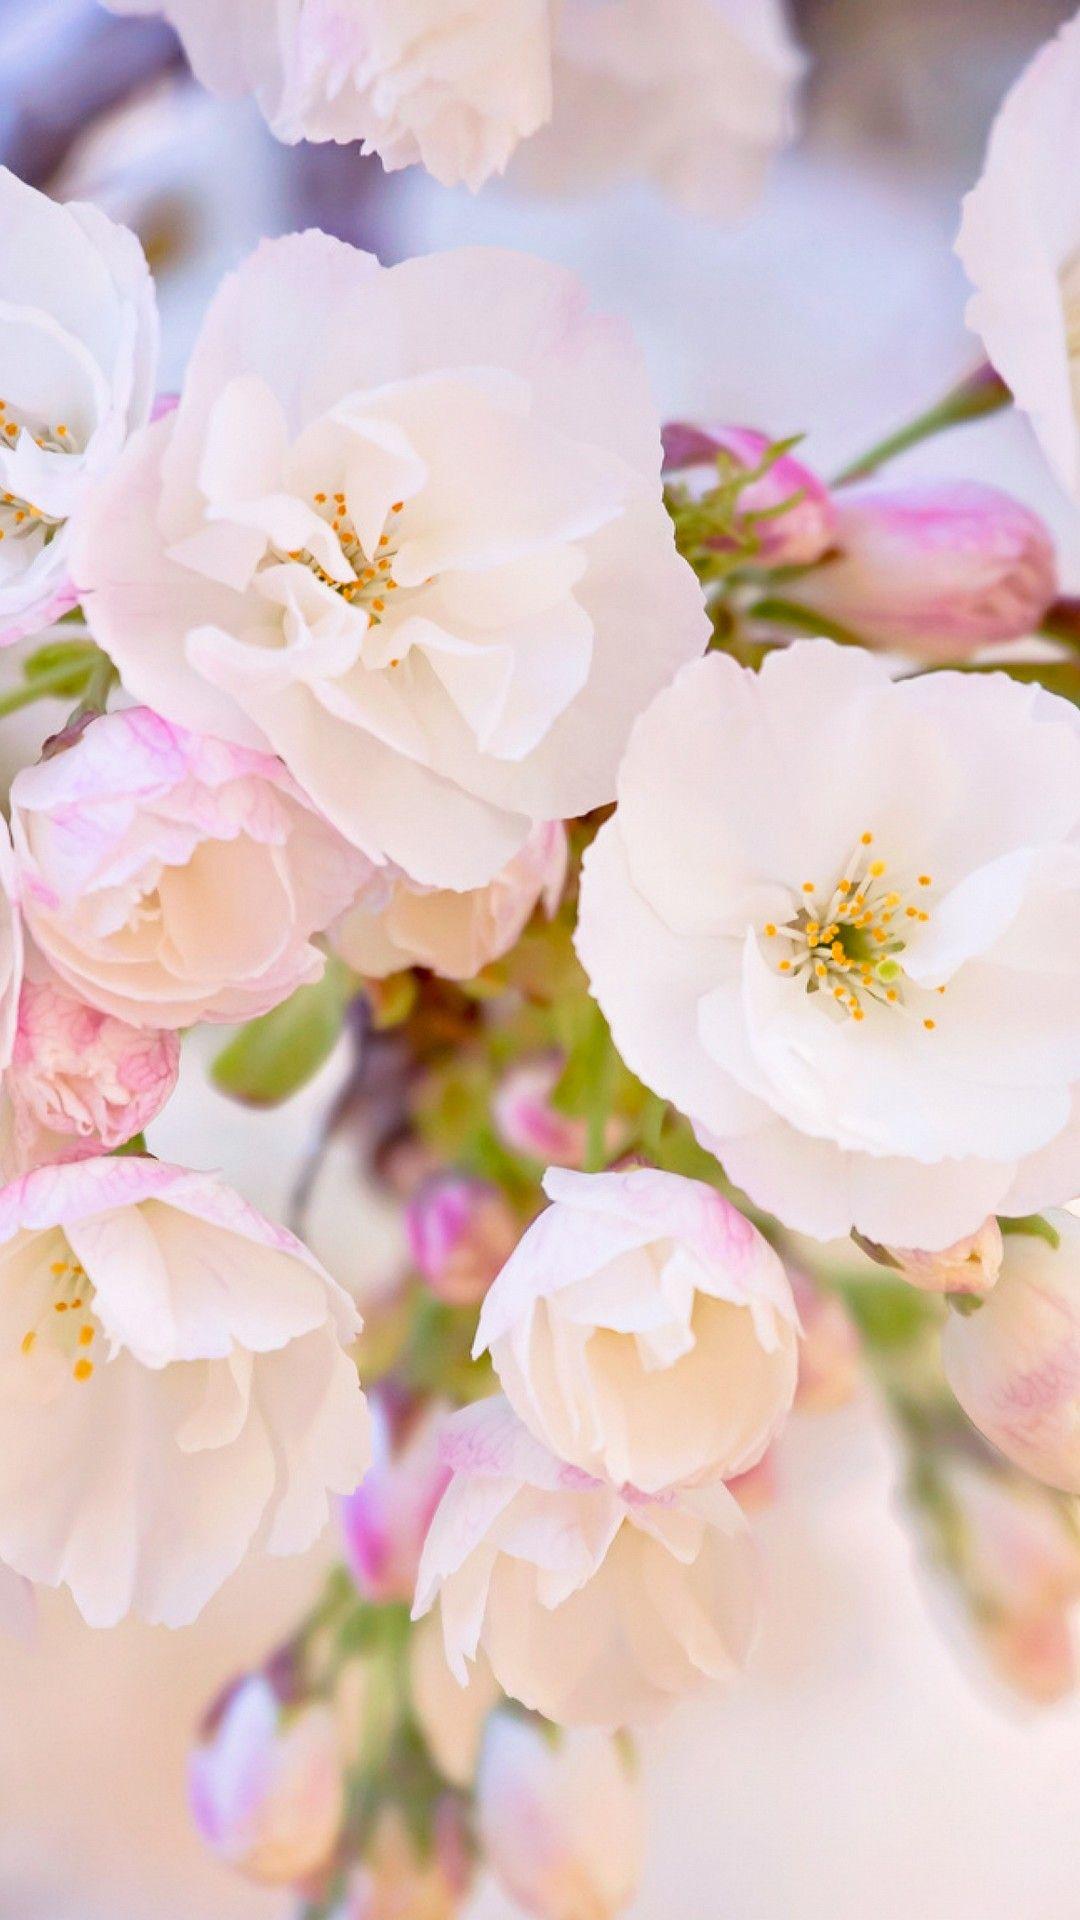 Android Wallpaper Spring Flowers Android Wallpaper flower, Spring wallpaper, Flower iphone wallpaper